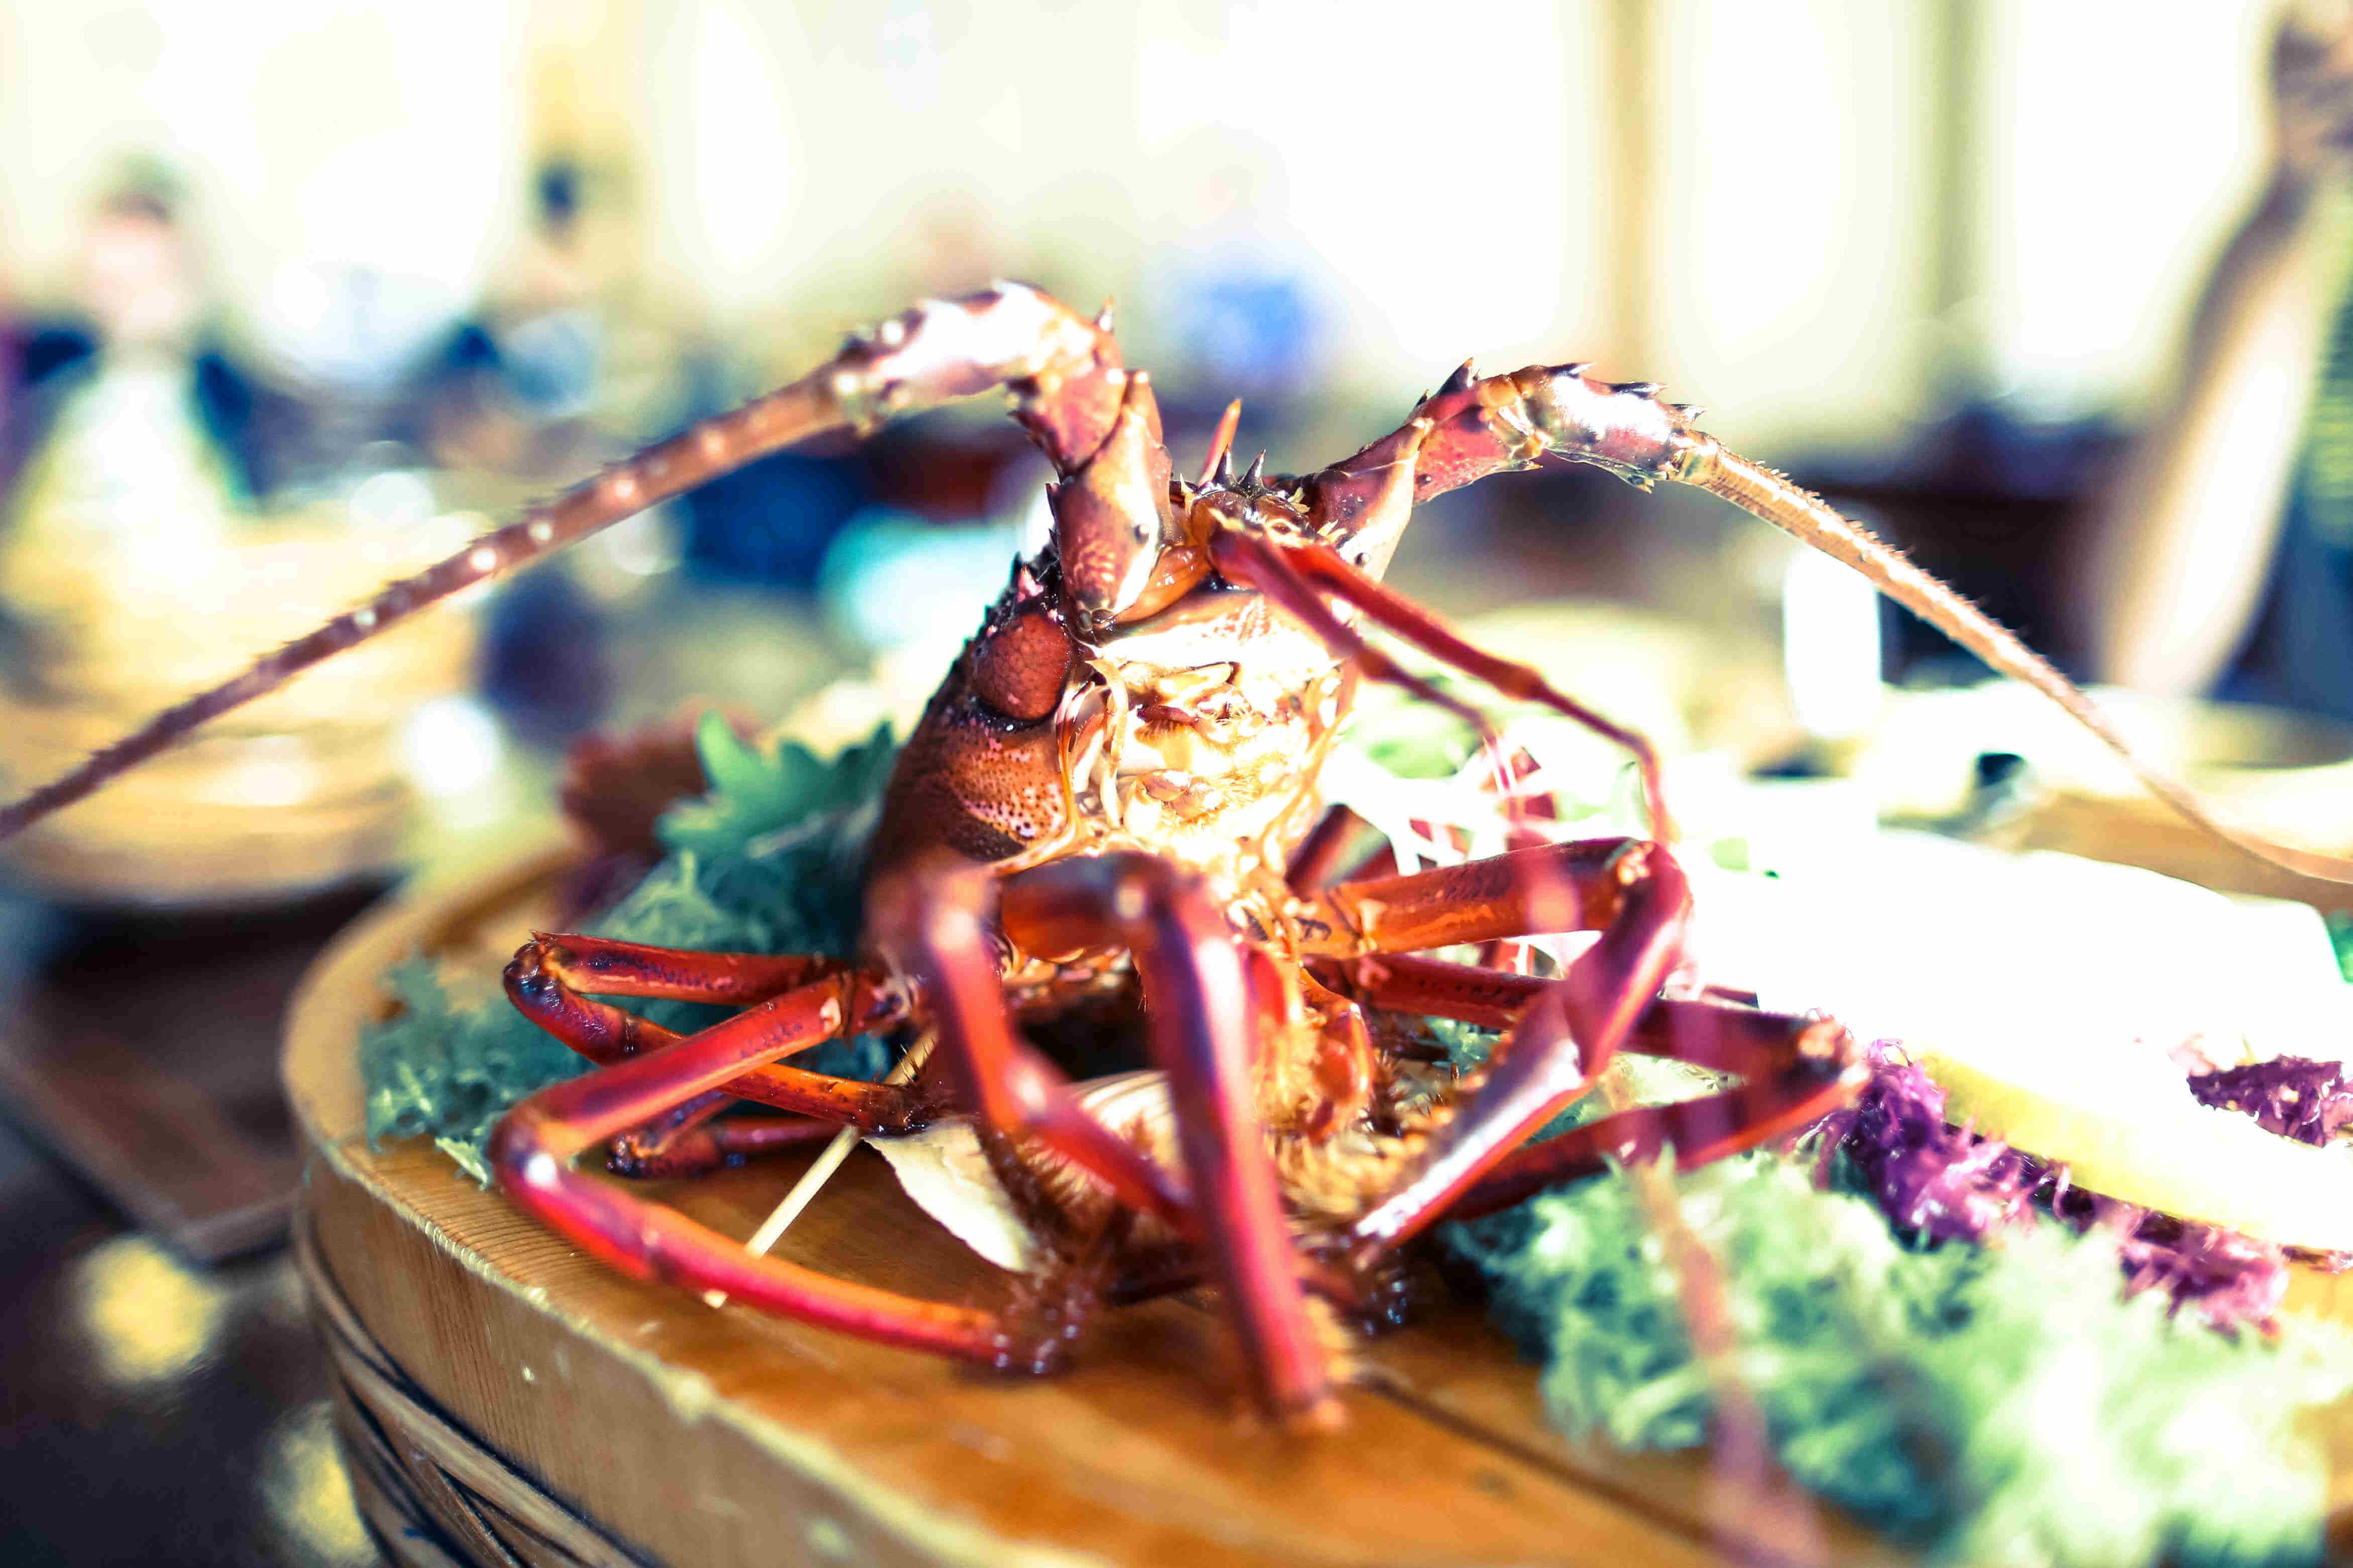 Close up, side view of a cooked lobster on a table, with a blurred out background